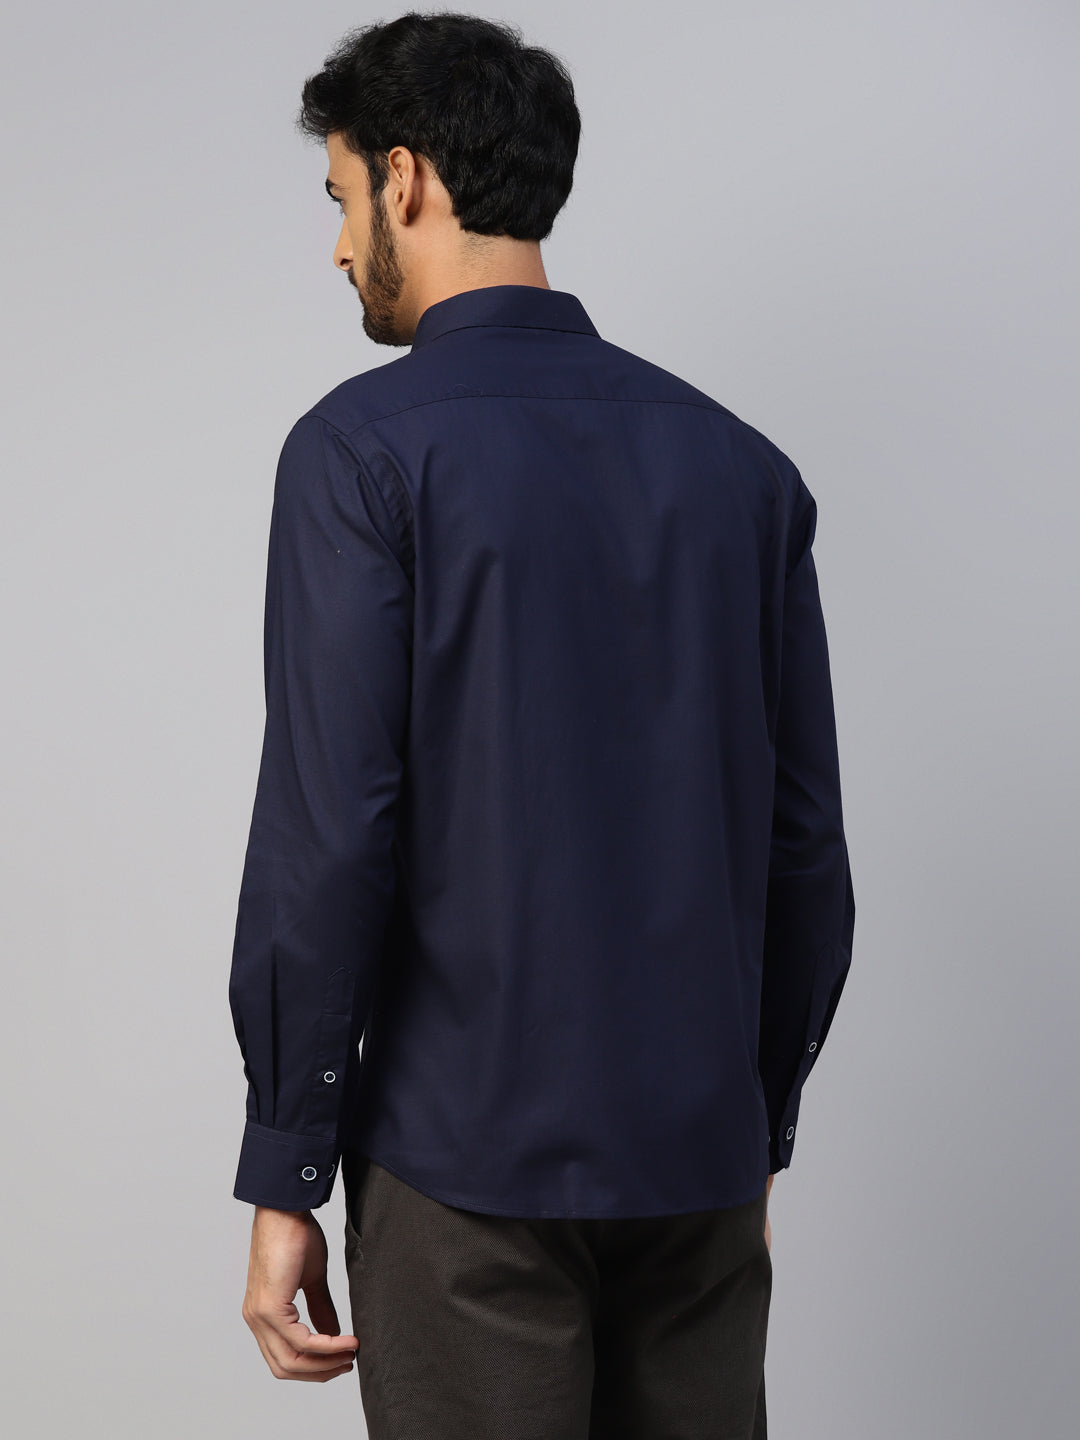 Don Vino Men's Slim Fit Navy Blue Shirt With Contrast Pockets